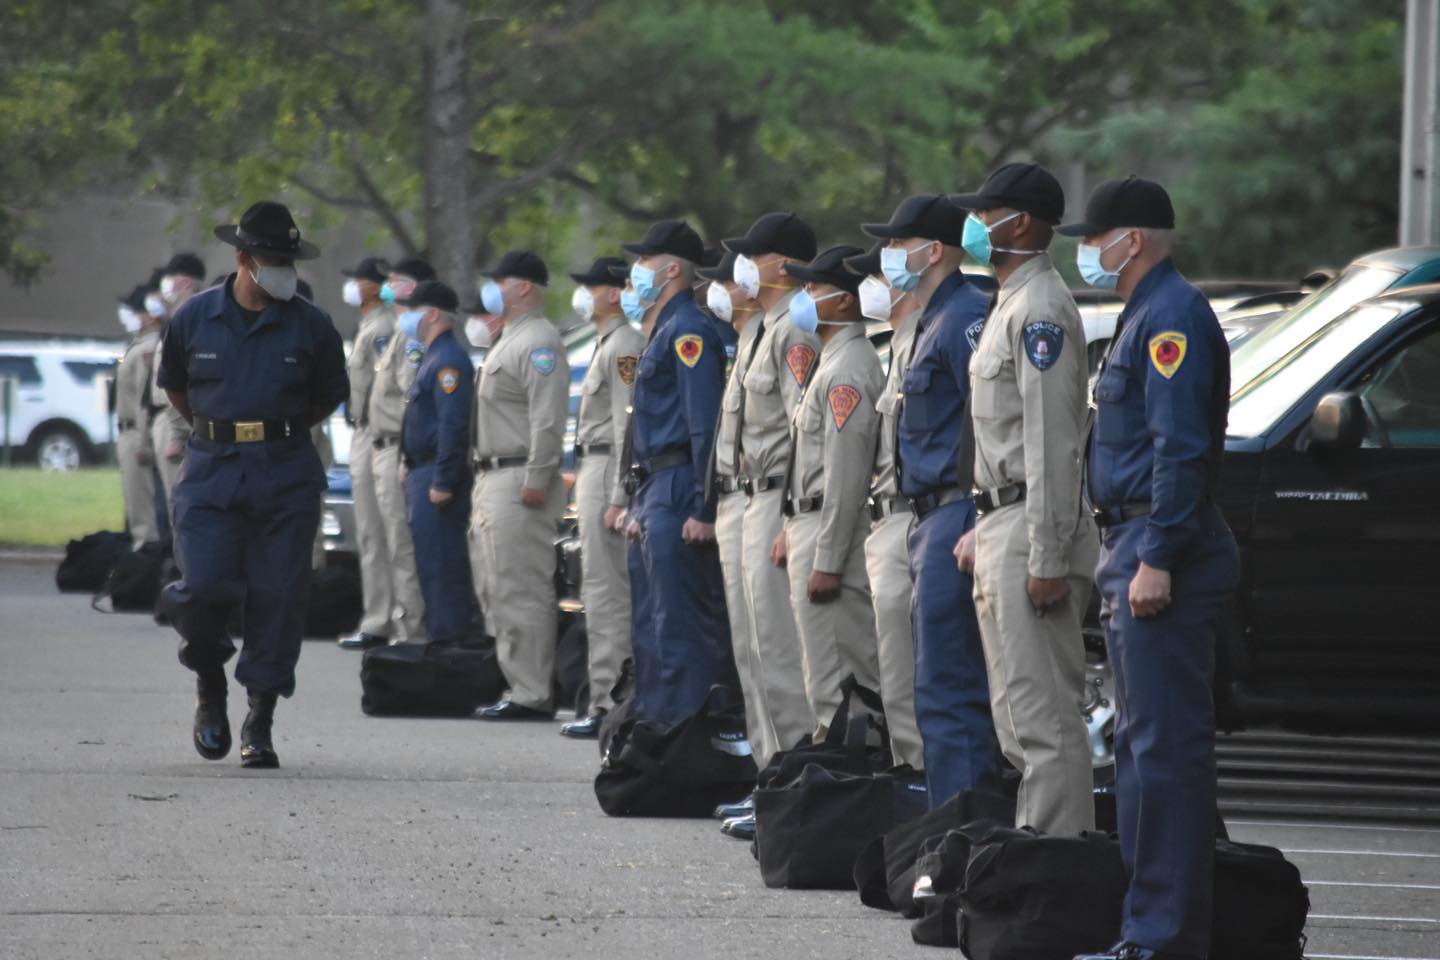 Recruits Graduate Monmouth County Police Academy Monmouth County